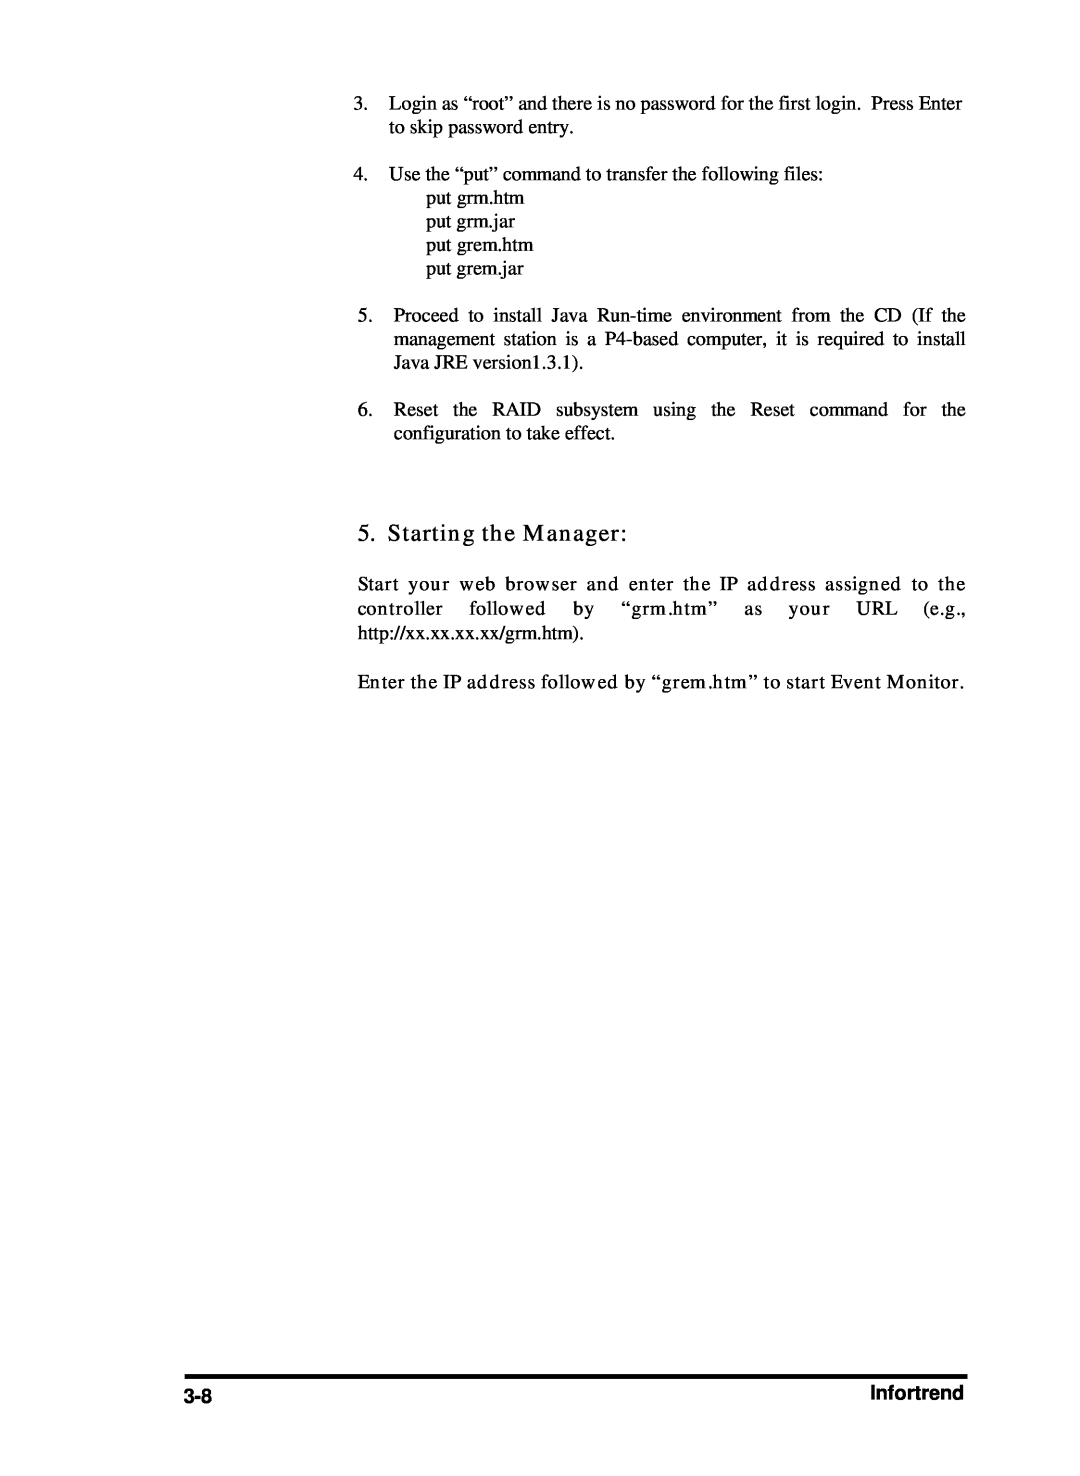 Compaq Infortrend manual Starting the Manager 